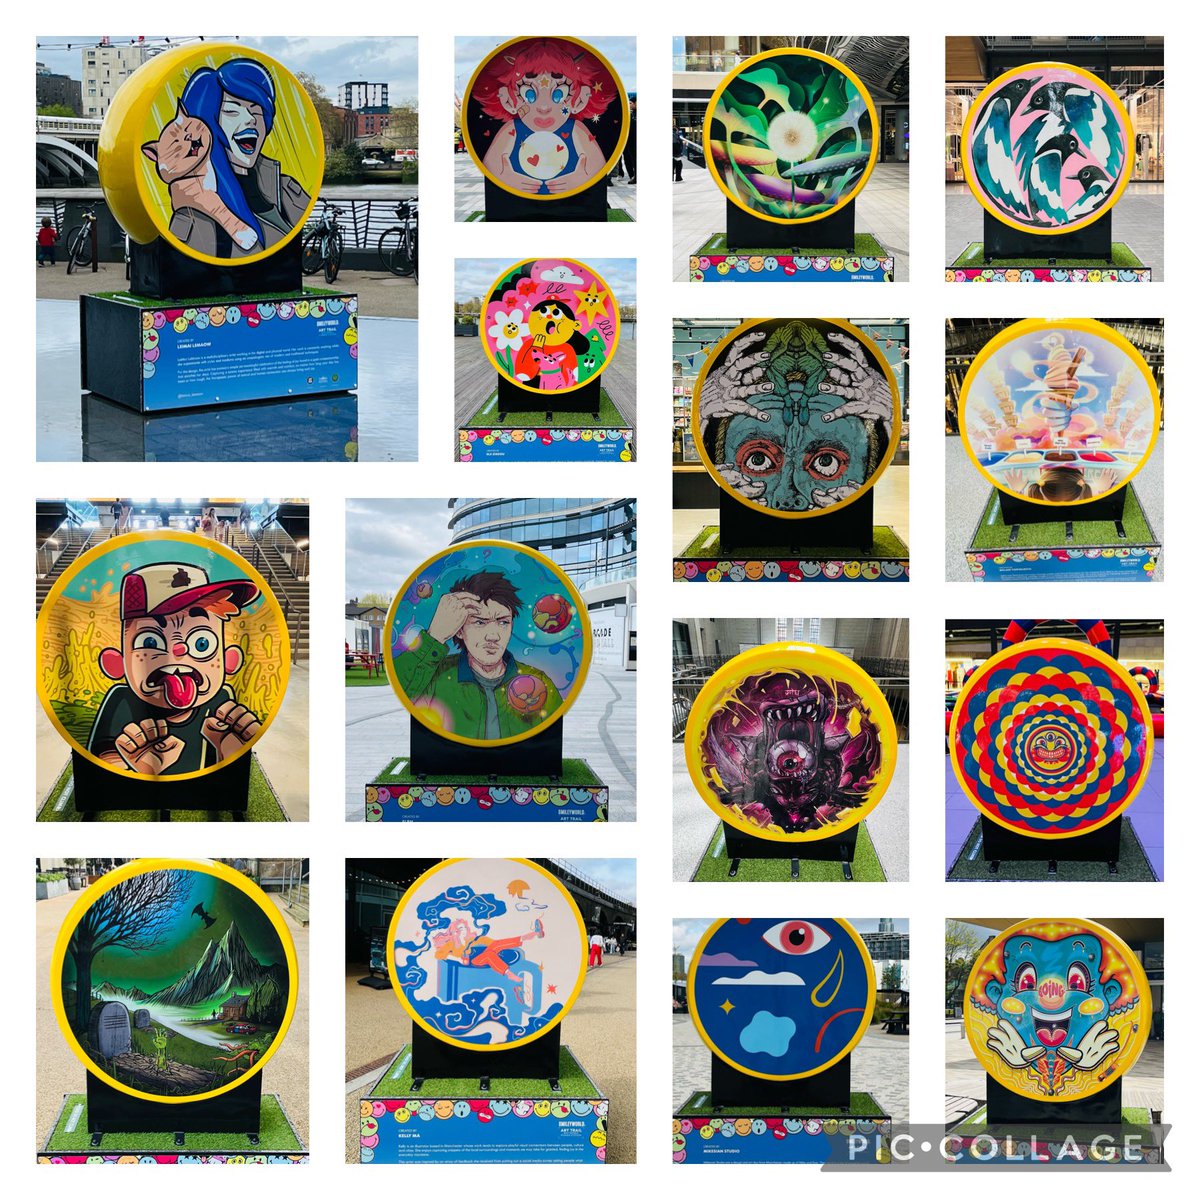 A @wildinart trail at @BatterseaPwrStn today looking for emojis depicting emotions and an artwork resembling that emotion. 15 to find and 15 found